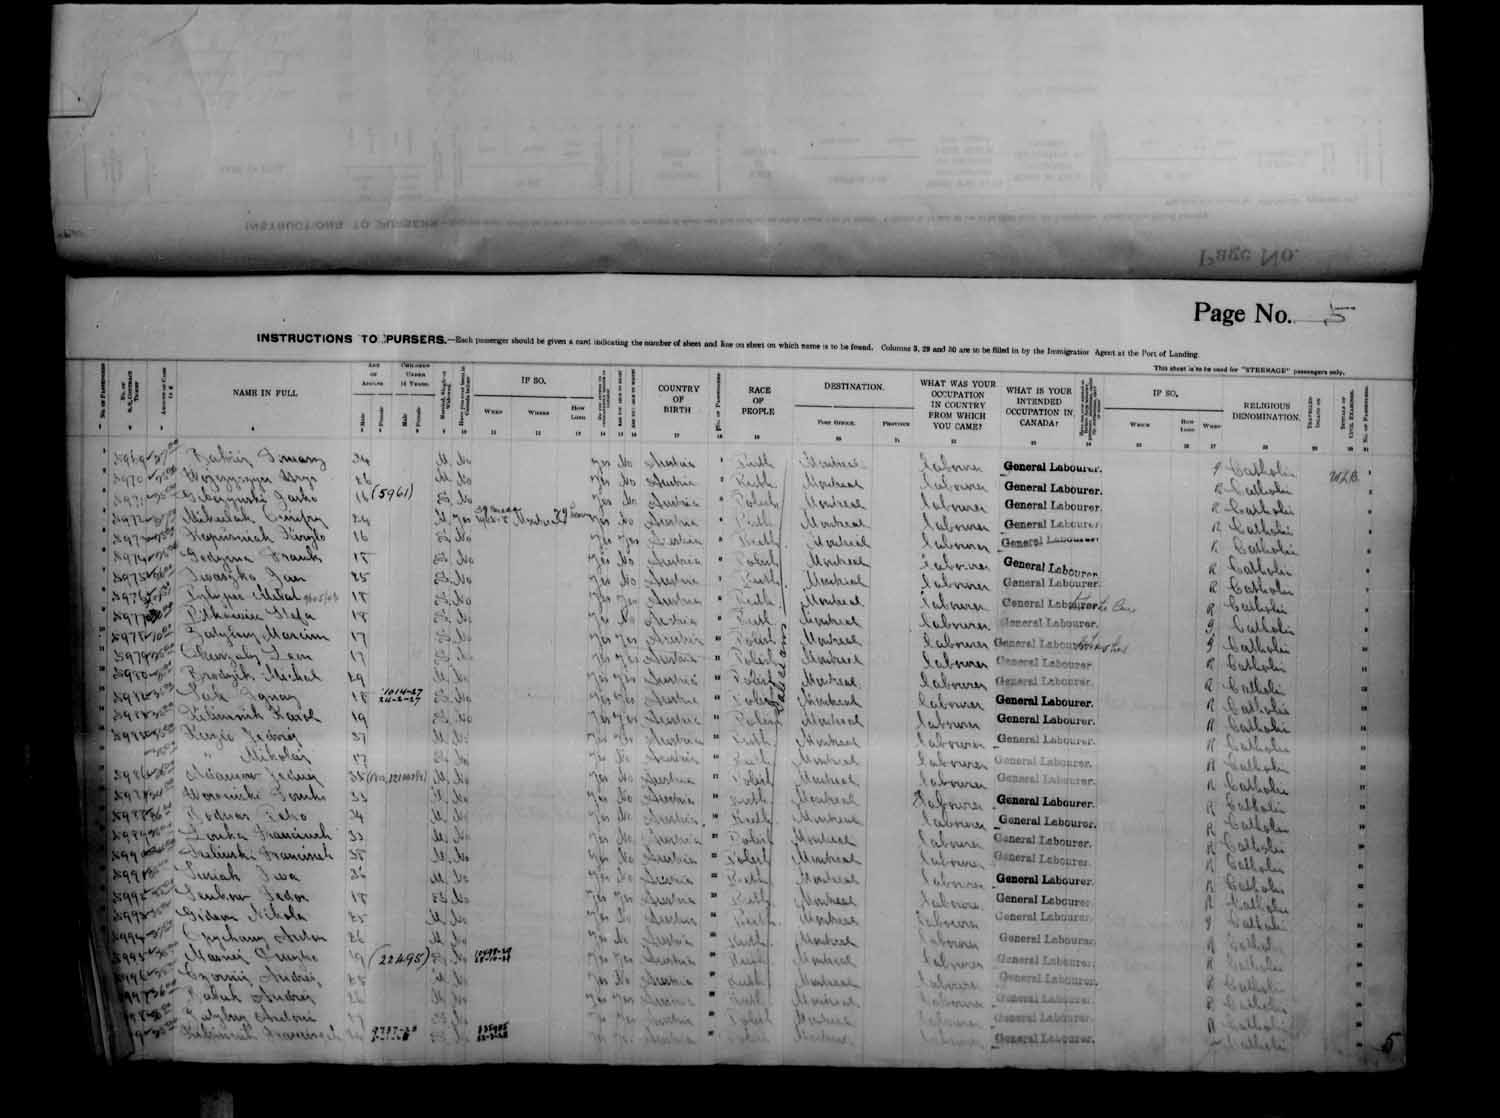 Digitized page of Passenger Lists for Image No.: e003686913